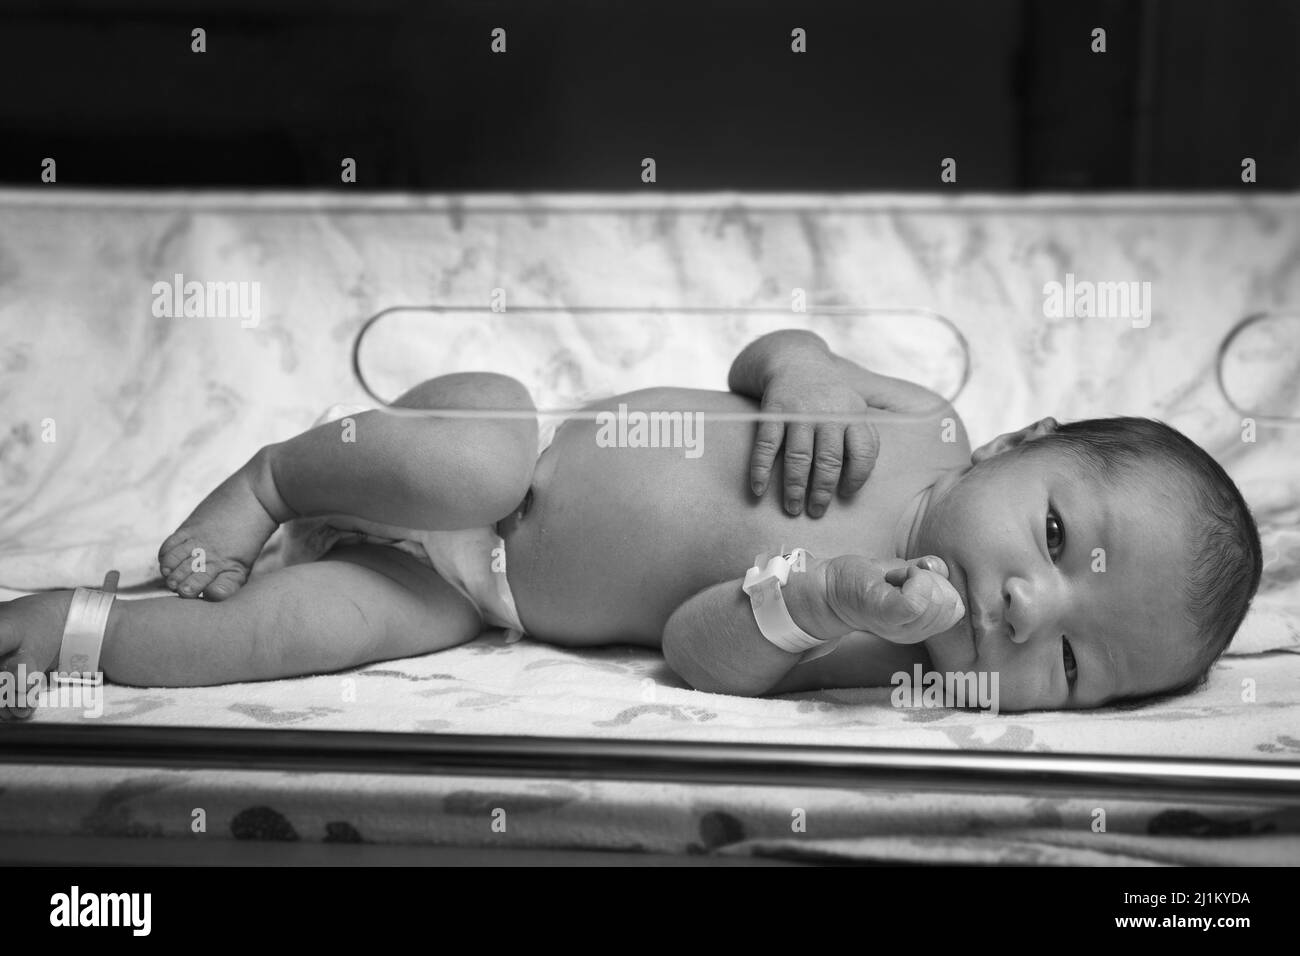 Newborn Baby only Hours Old in the Hospital Stock Photo